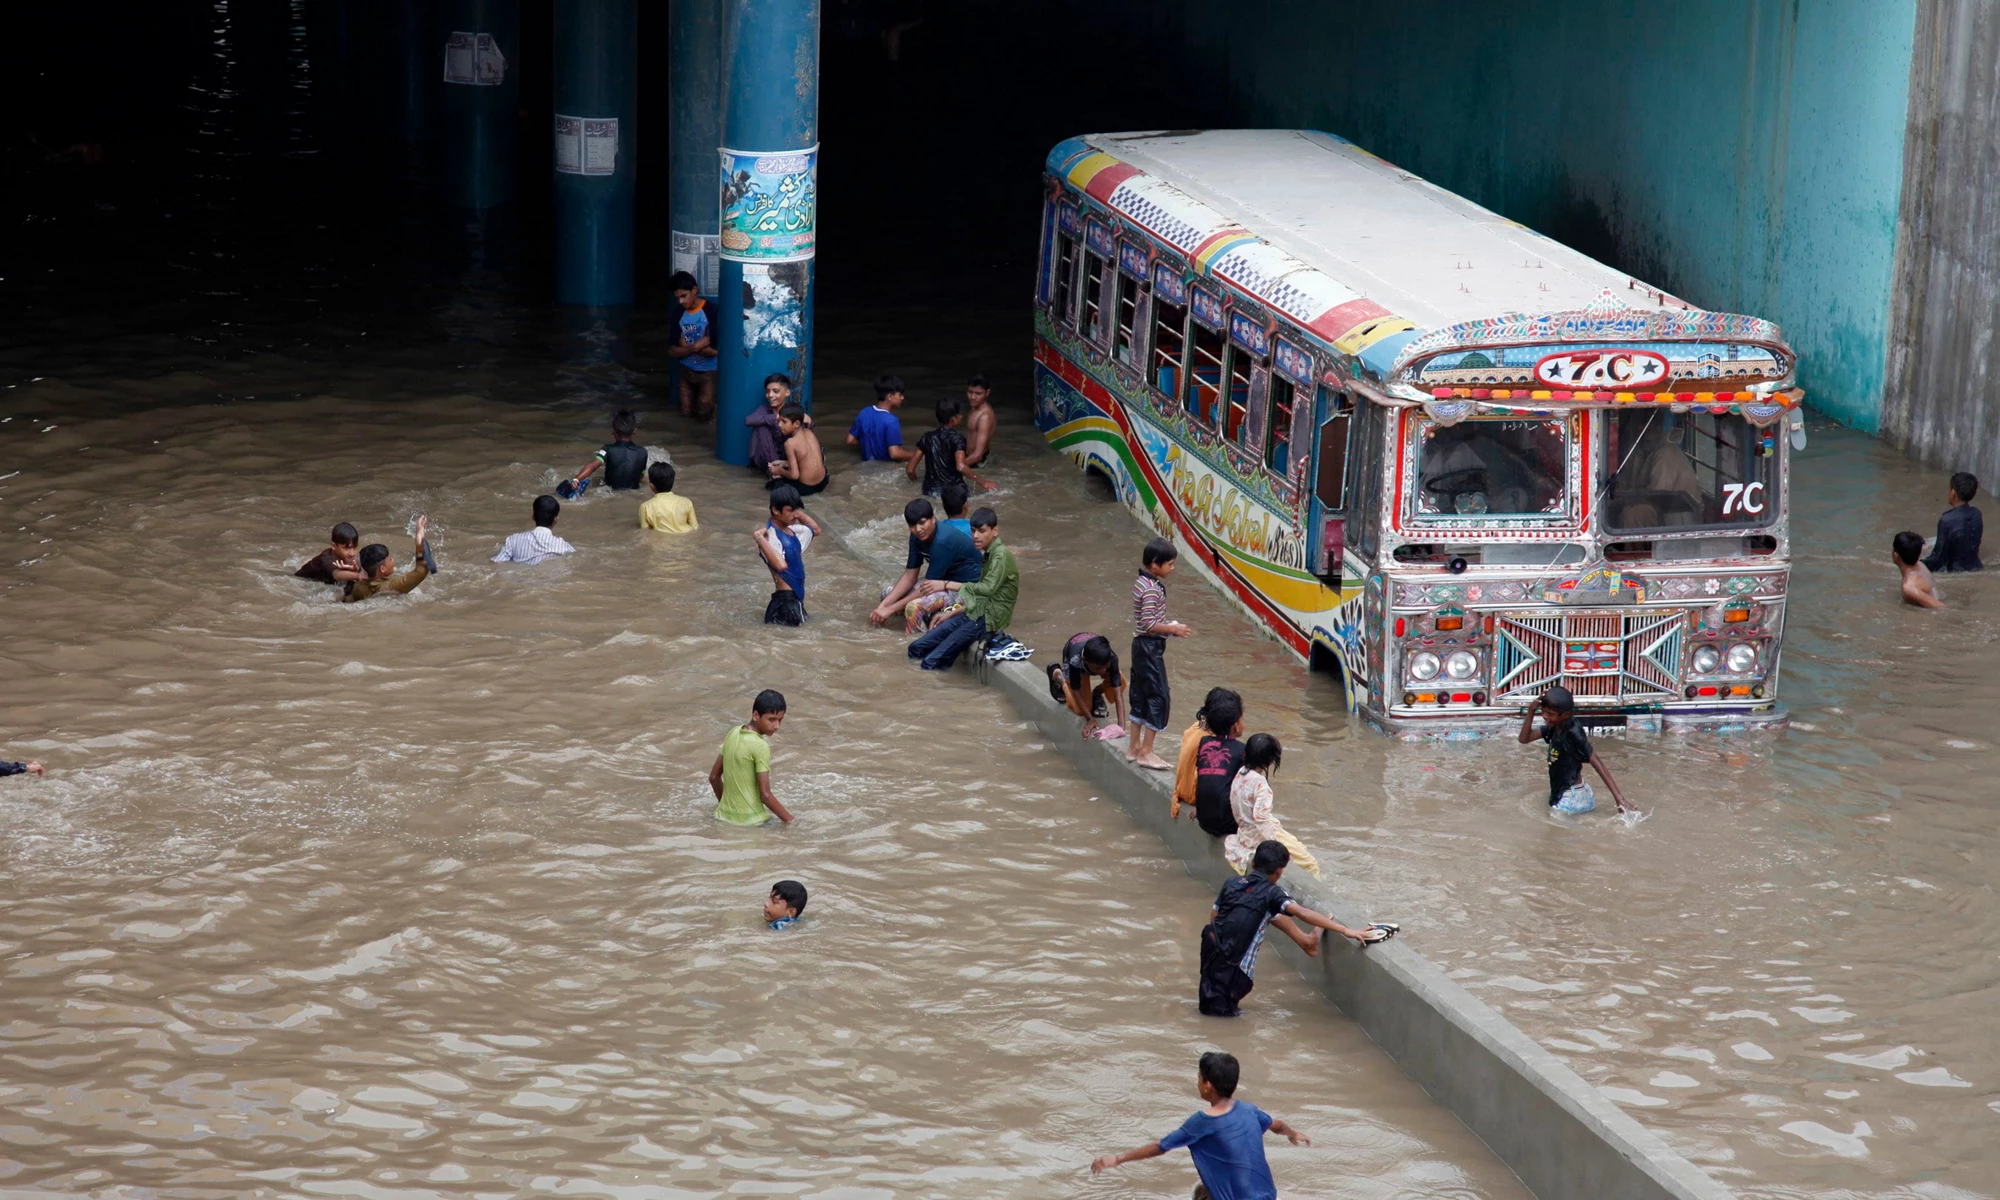 Flooded bus and passengers in Karachi floods